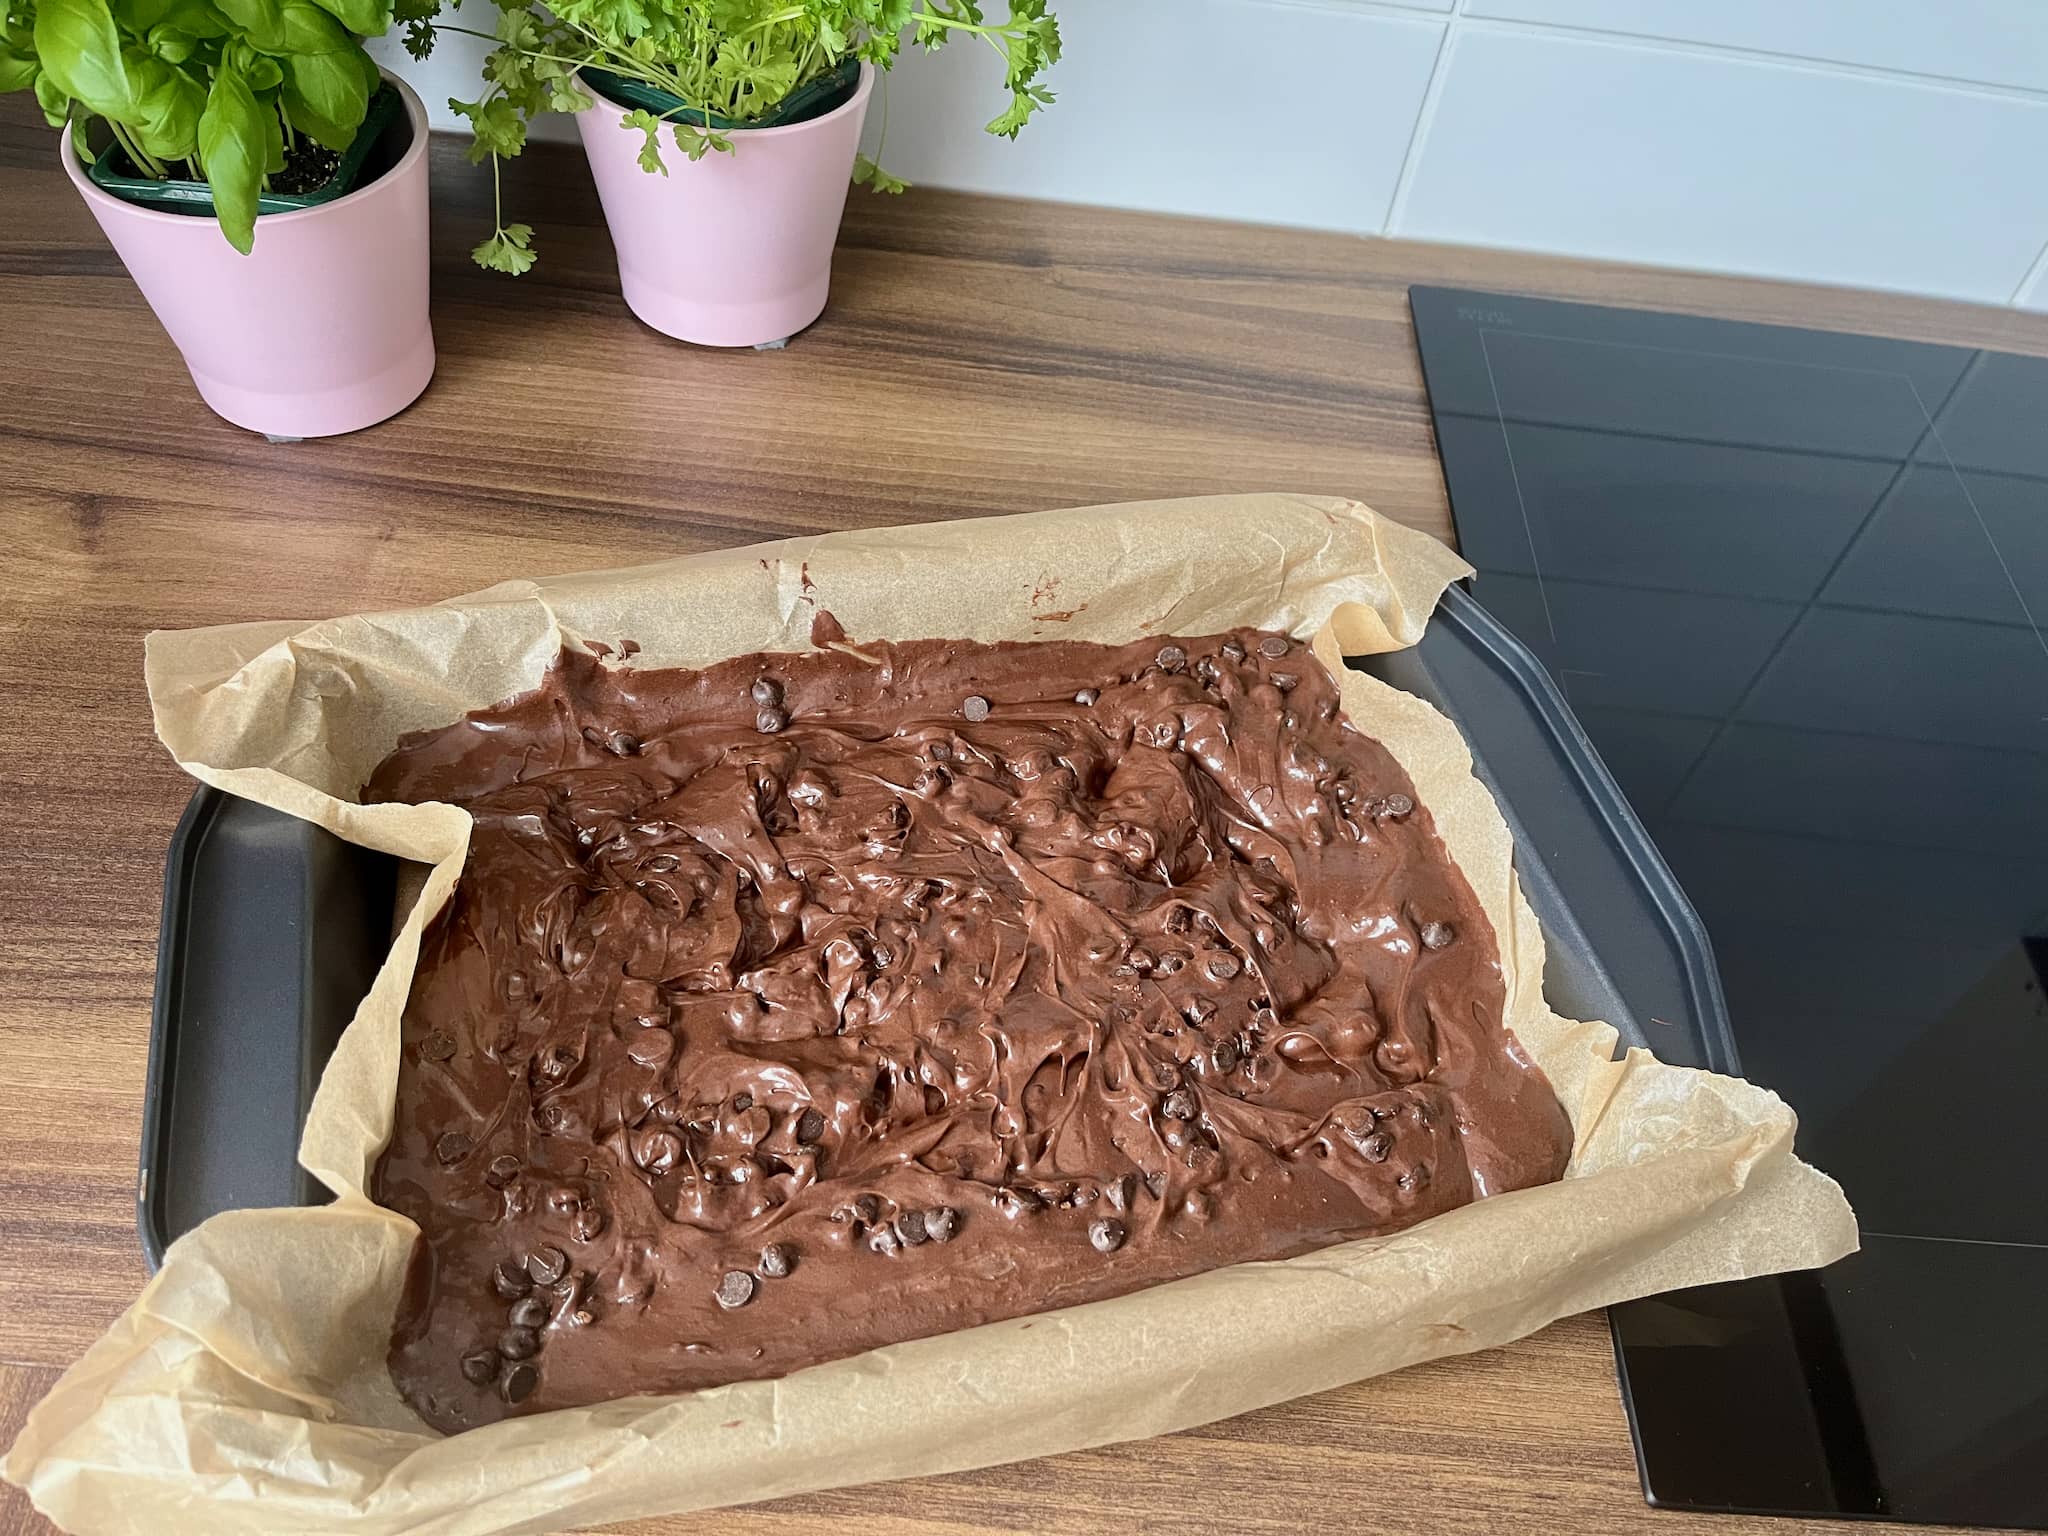 Nut-Free Homemade Brownie - Ready for baking